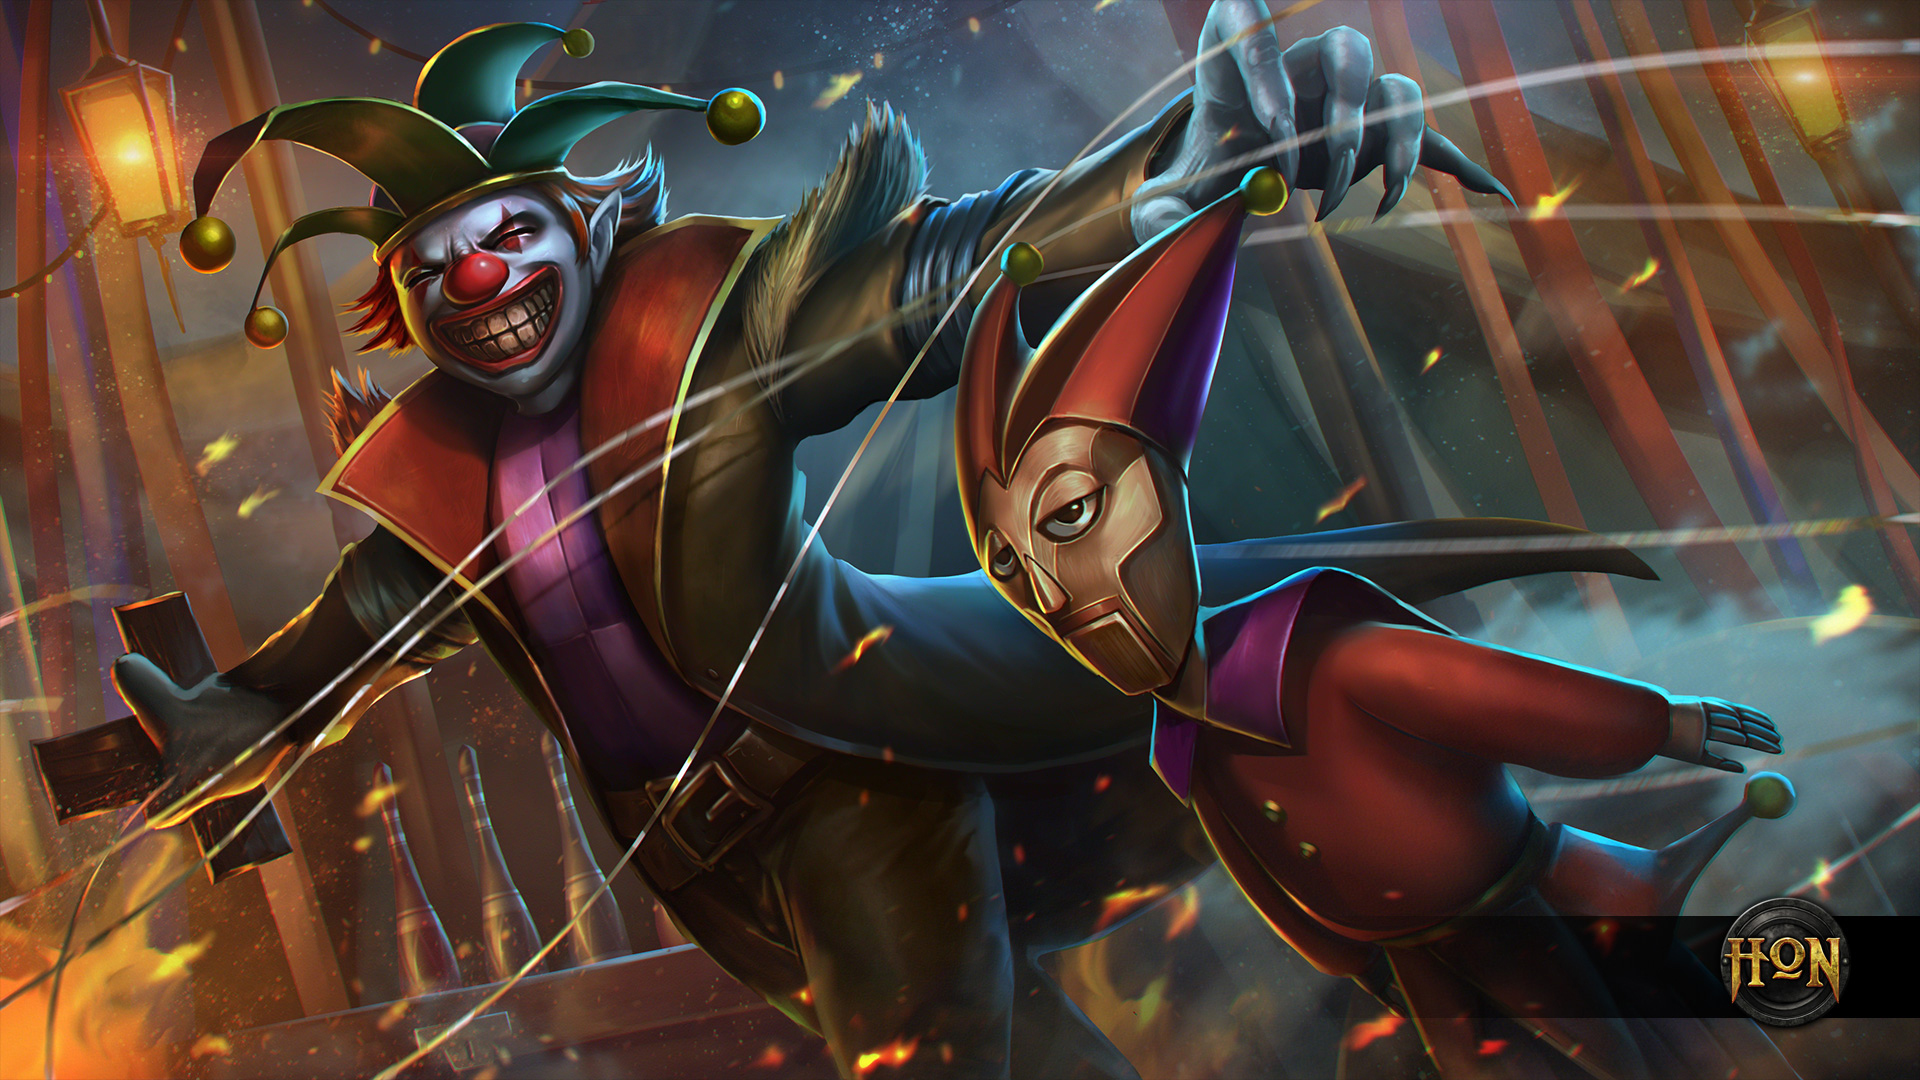 1080p Puppet Master (Heroes Of Newerth) Hd Images